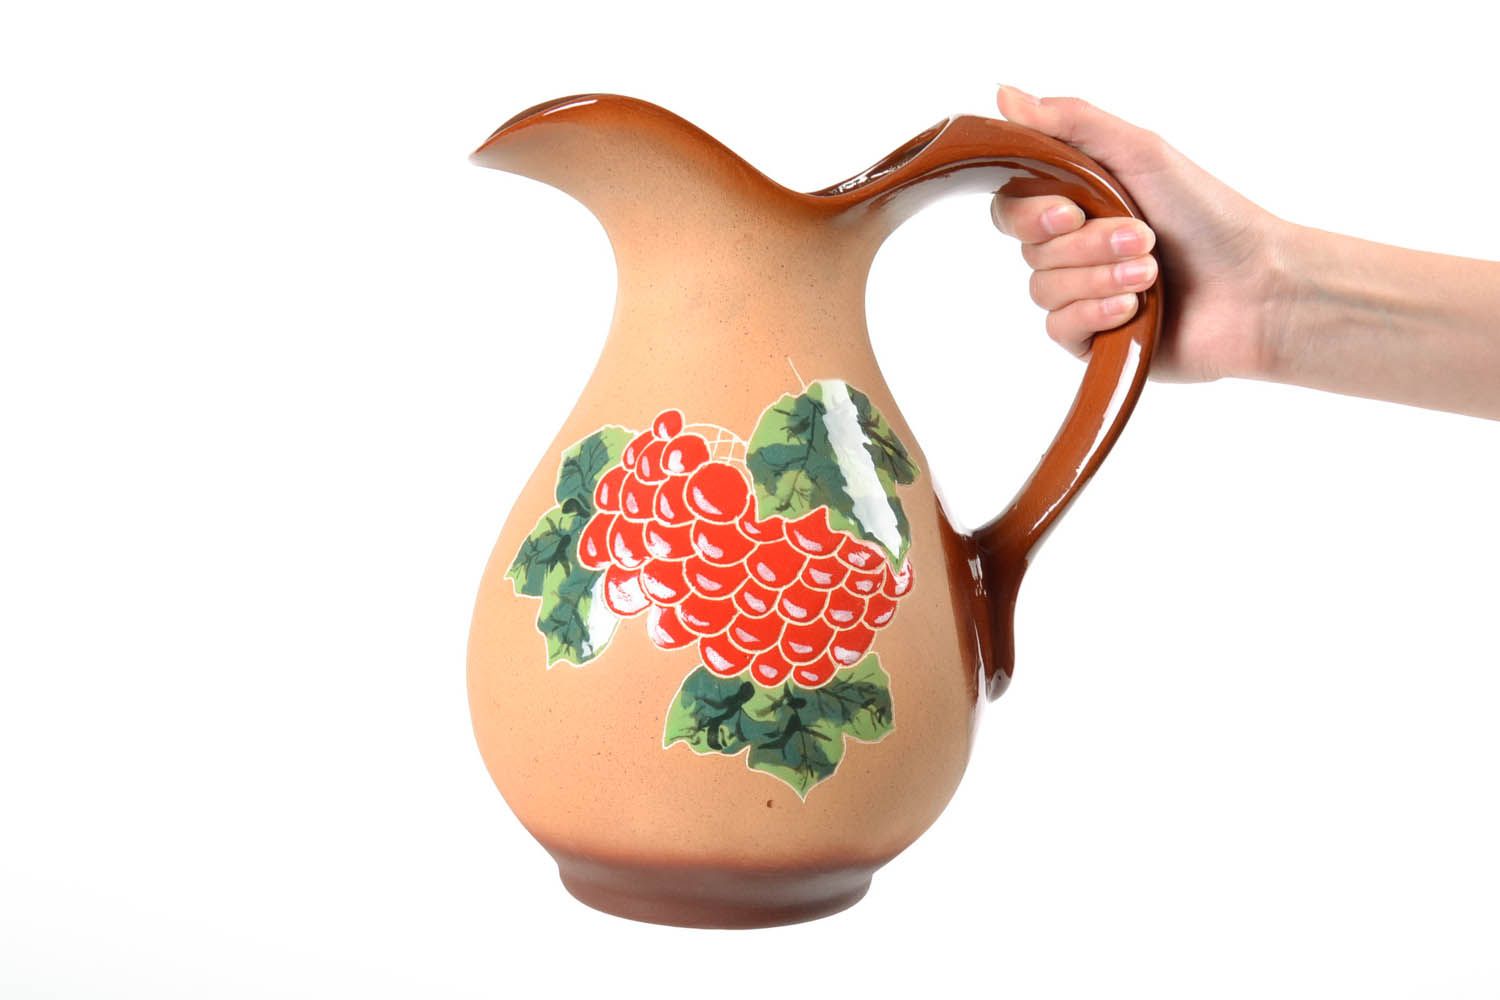 Large 100 oz ceramic wine pitcher with handle and grape pattern in brown color 4 lb photo 2